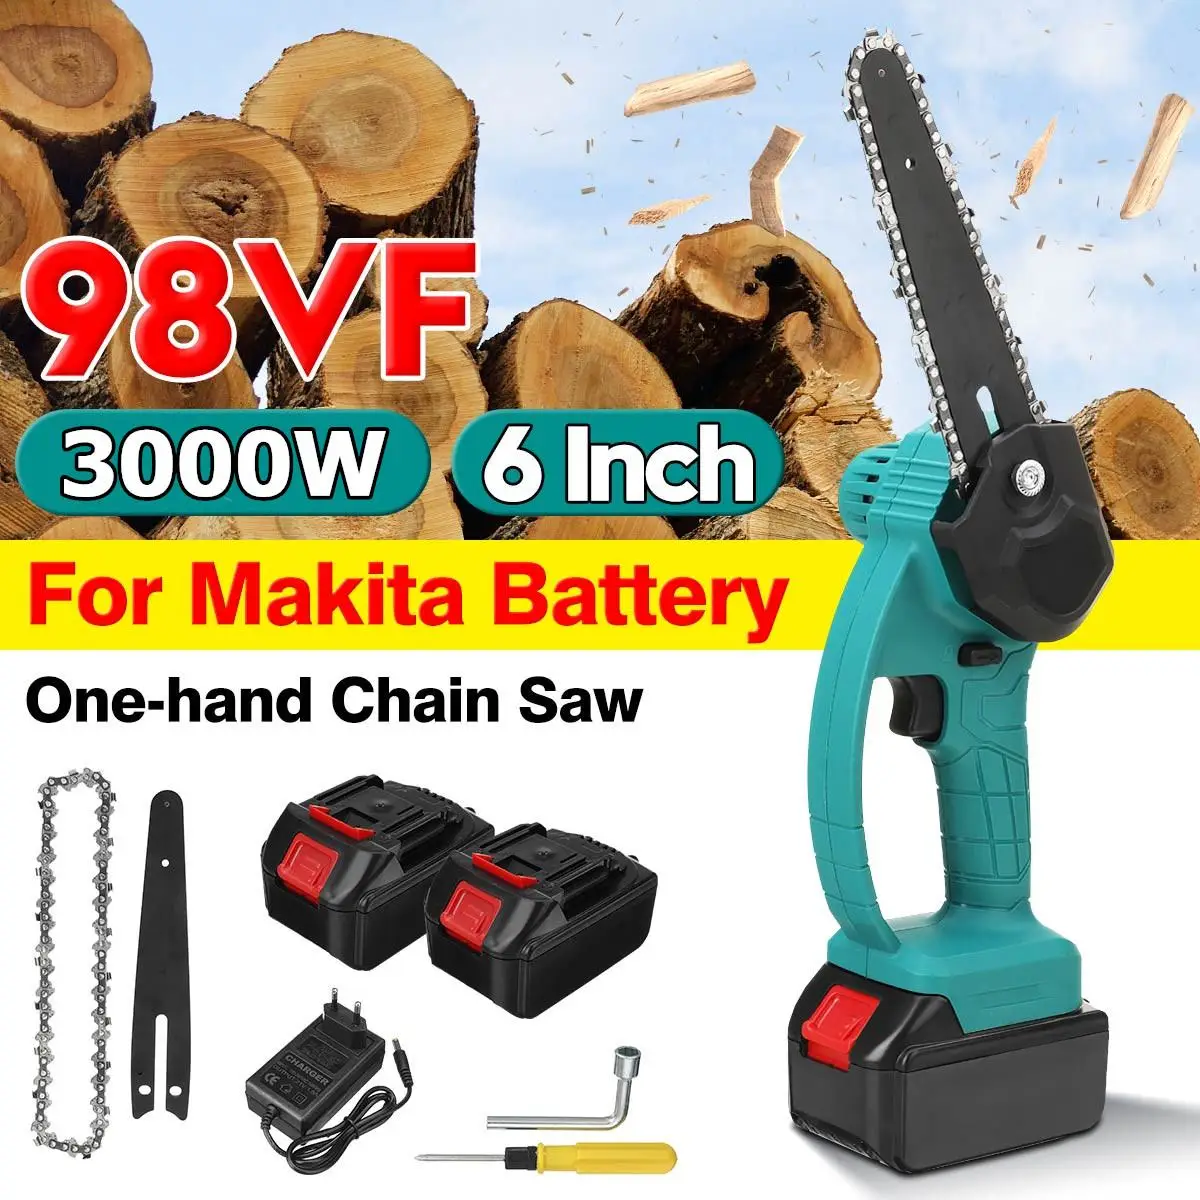 

98V 6 Inch Brushless Chain Saw Cordless Mini Handheld Pruning Saw Portable Woodworking Electric Chain Saw Cutting Tool